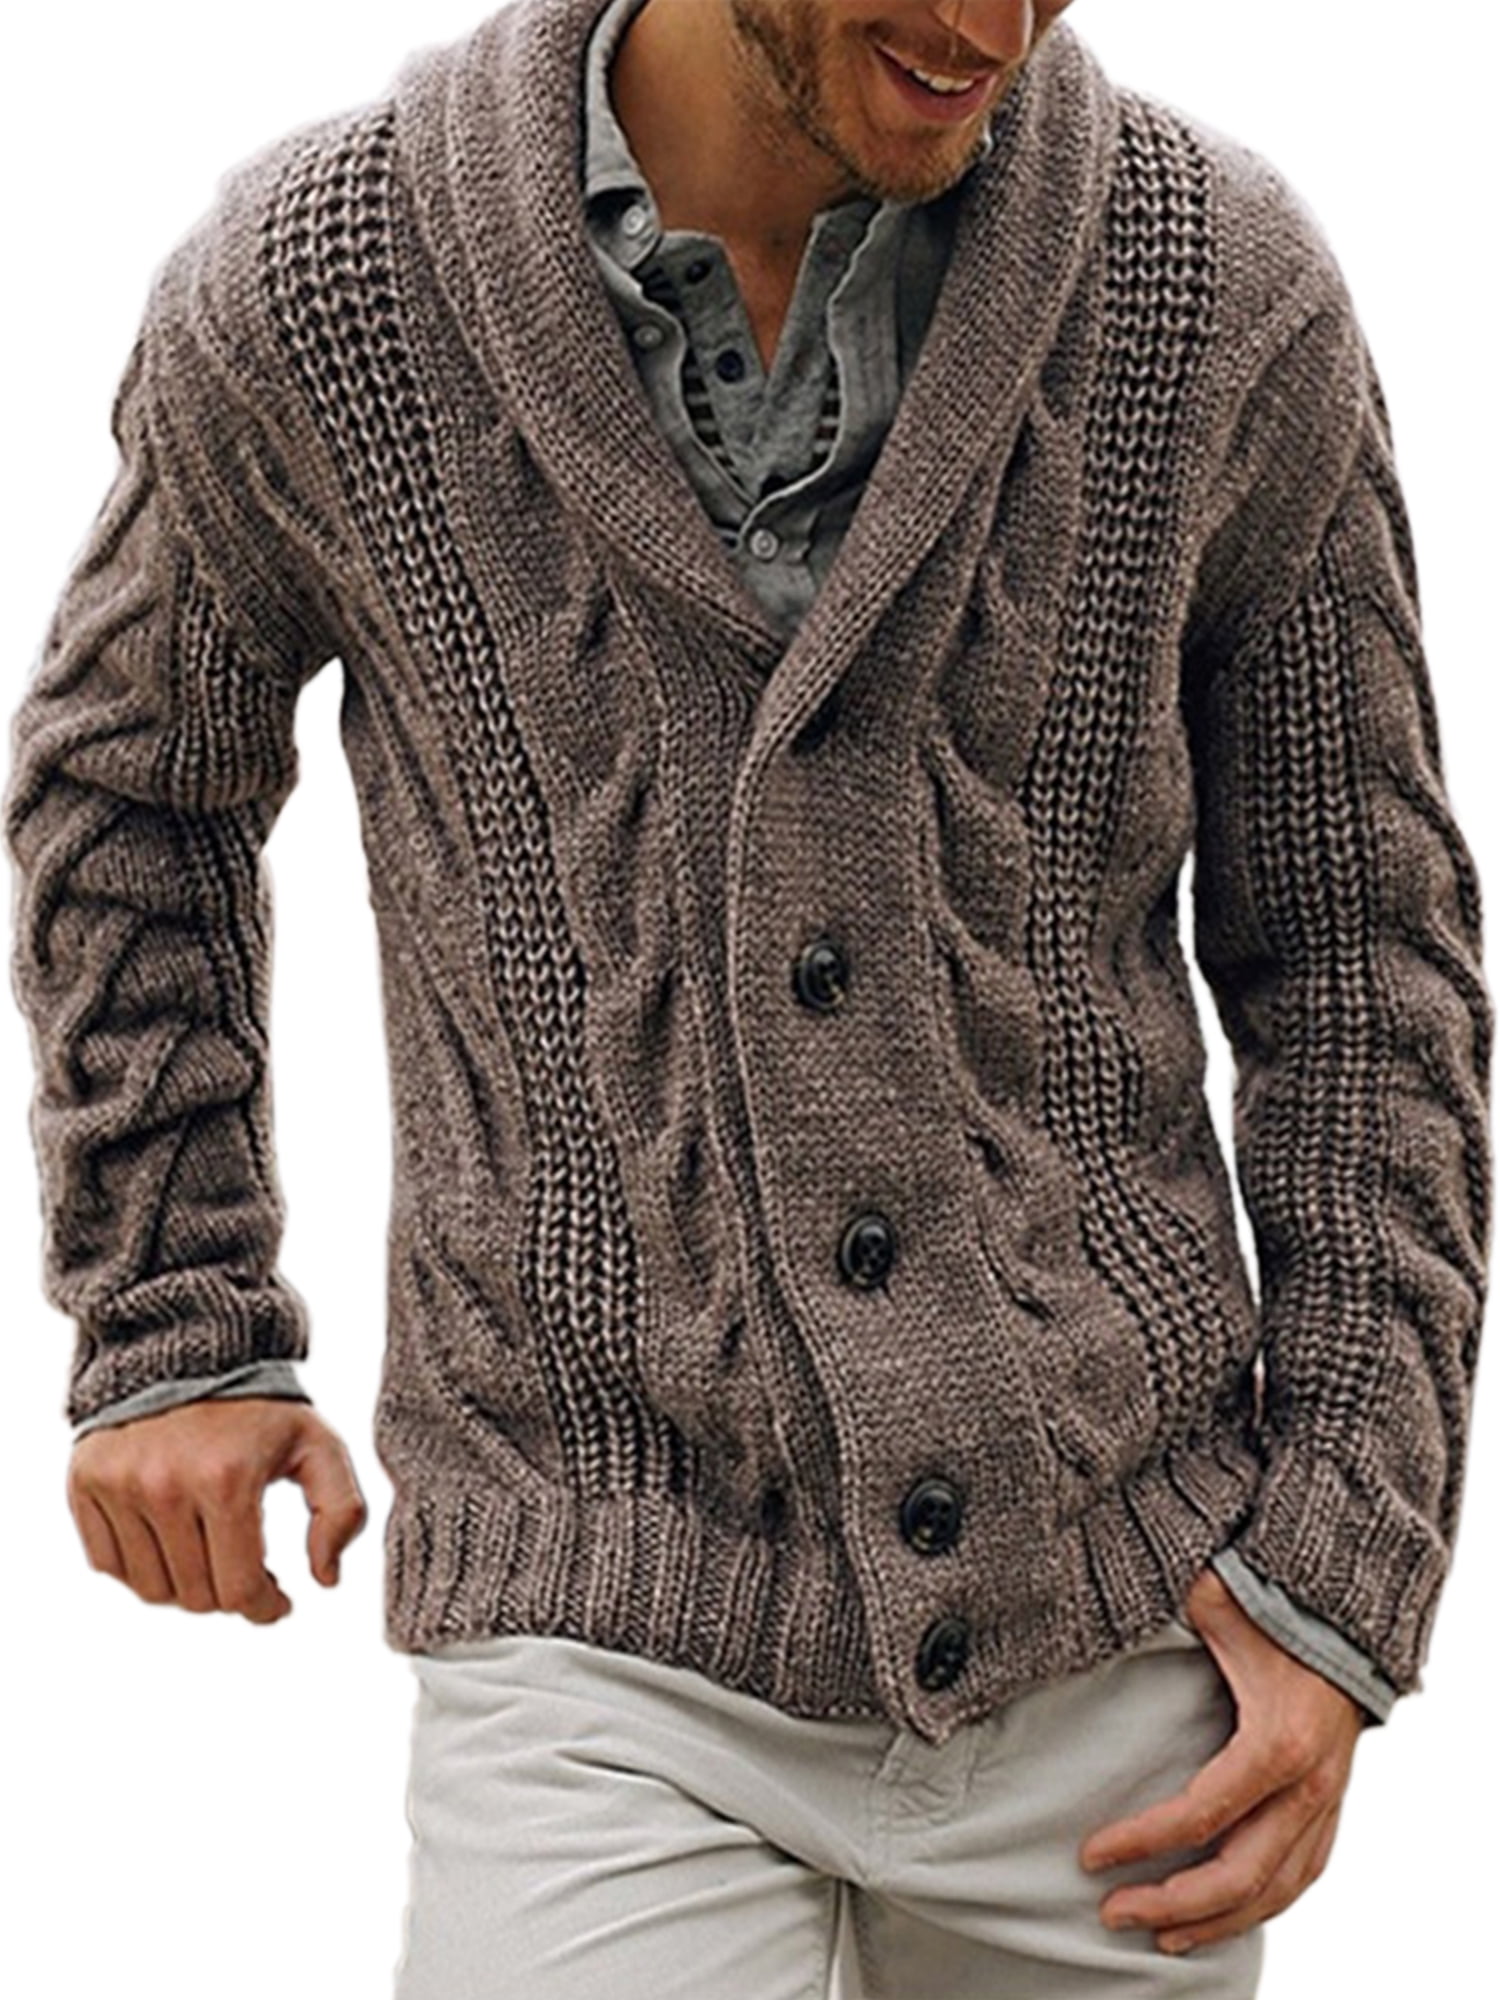 Details about  / Men/'s winter sweaters your choice XXL